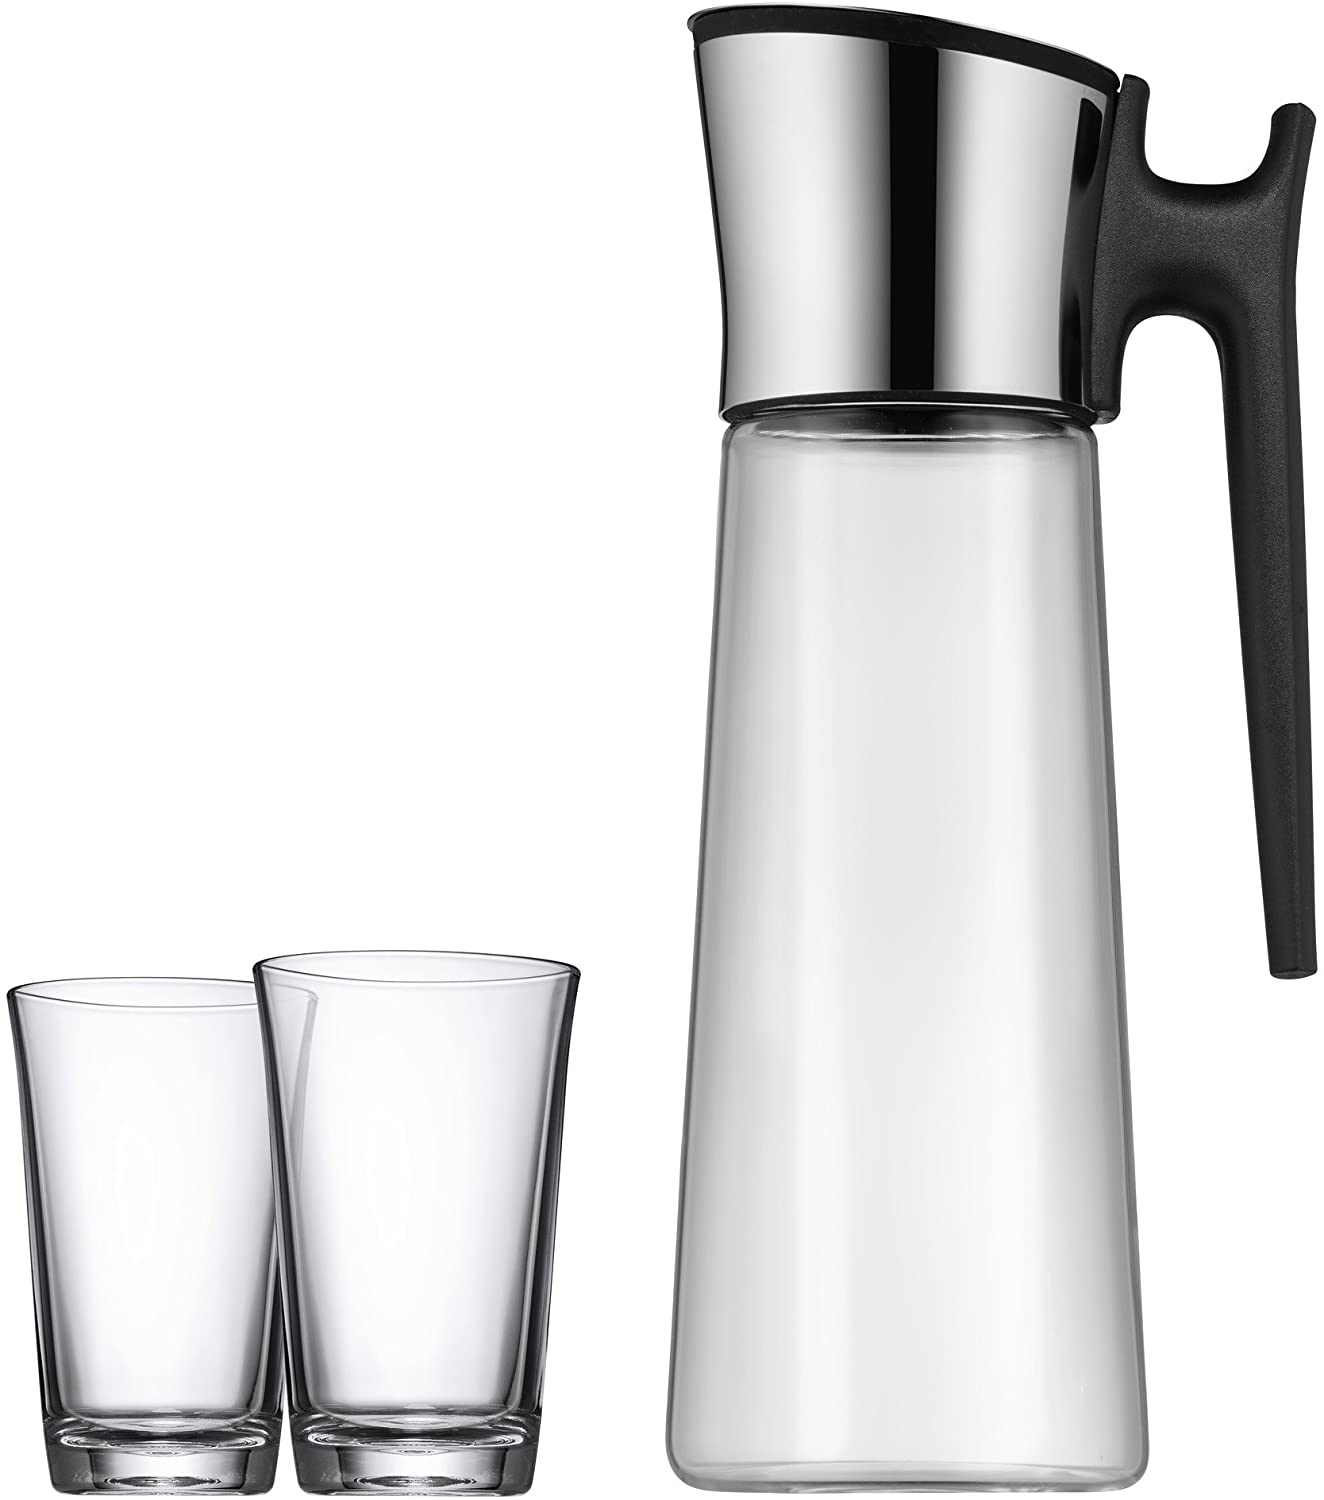 WMF 0618049991 Water Carafe Glass 1.5 Litres Height 31 cm Closeup – Stainless Steel and 2 Glasses